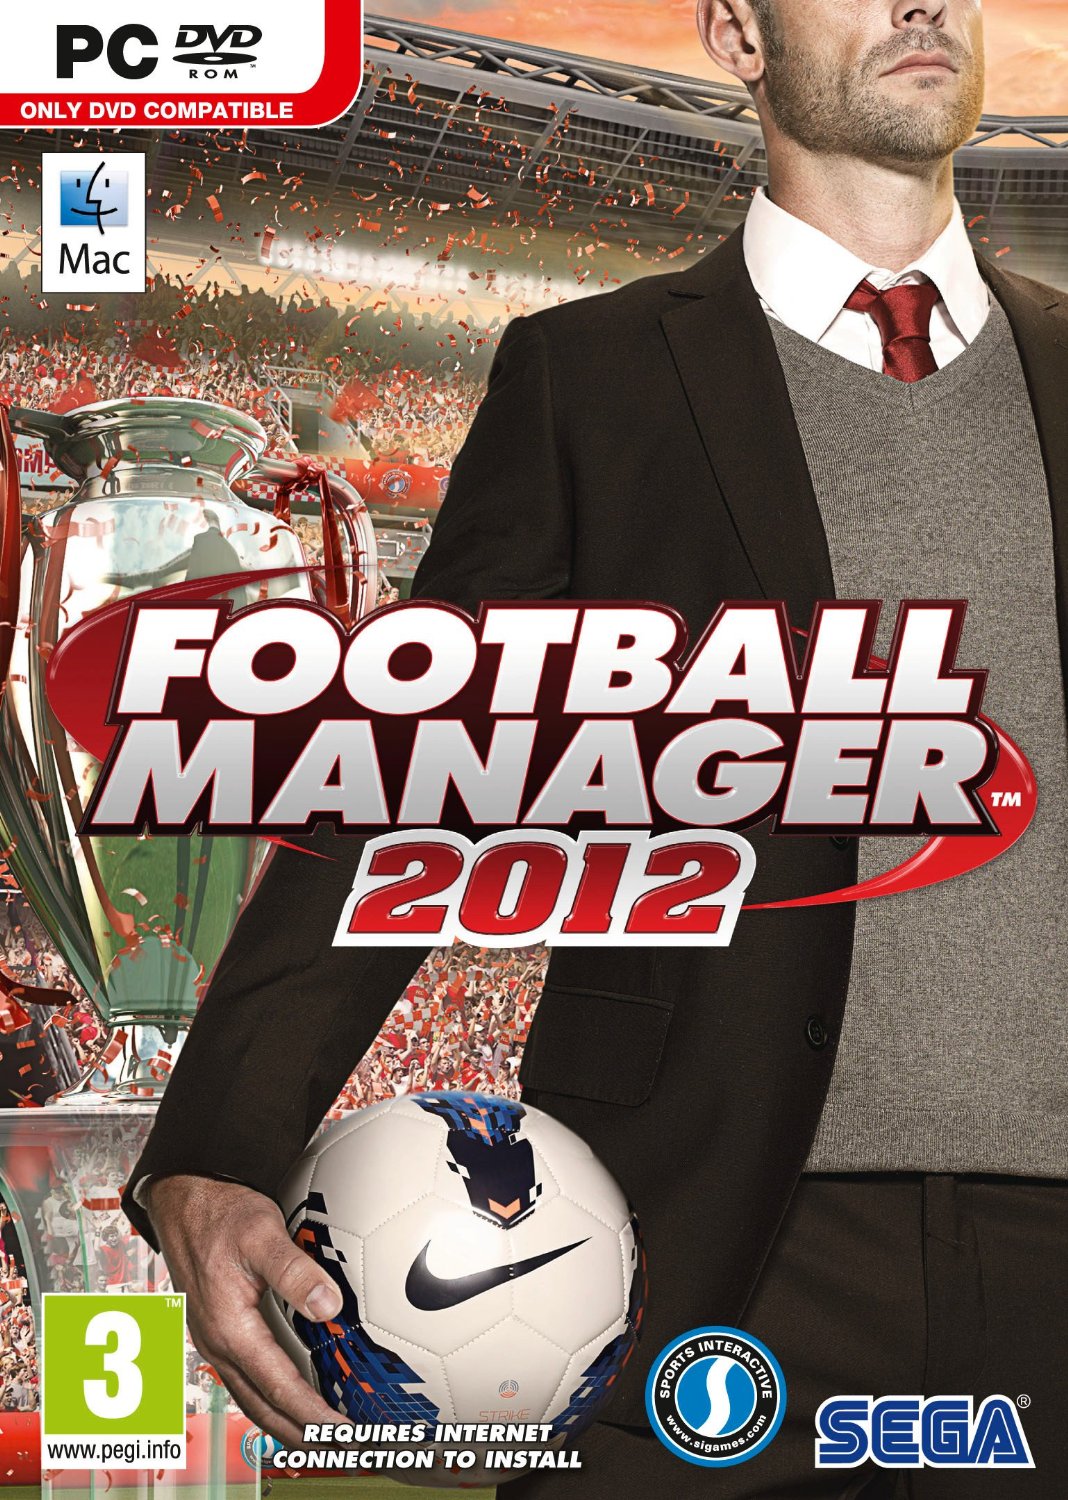 Where can i download football manager 2012 for free mac reddit